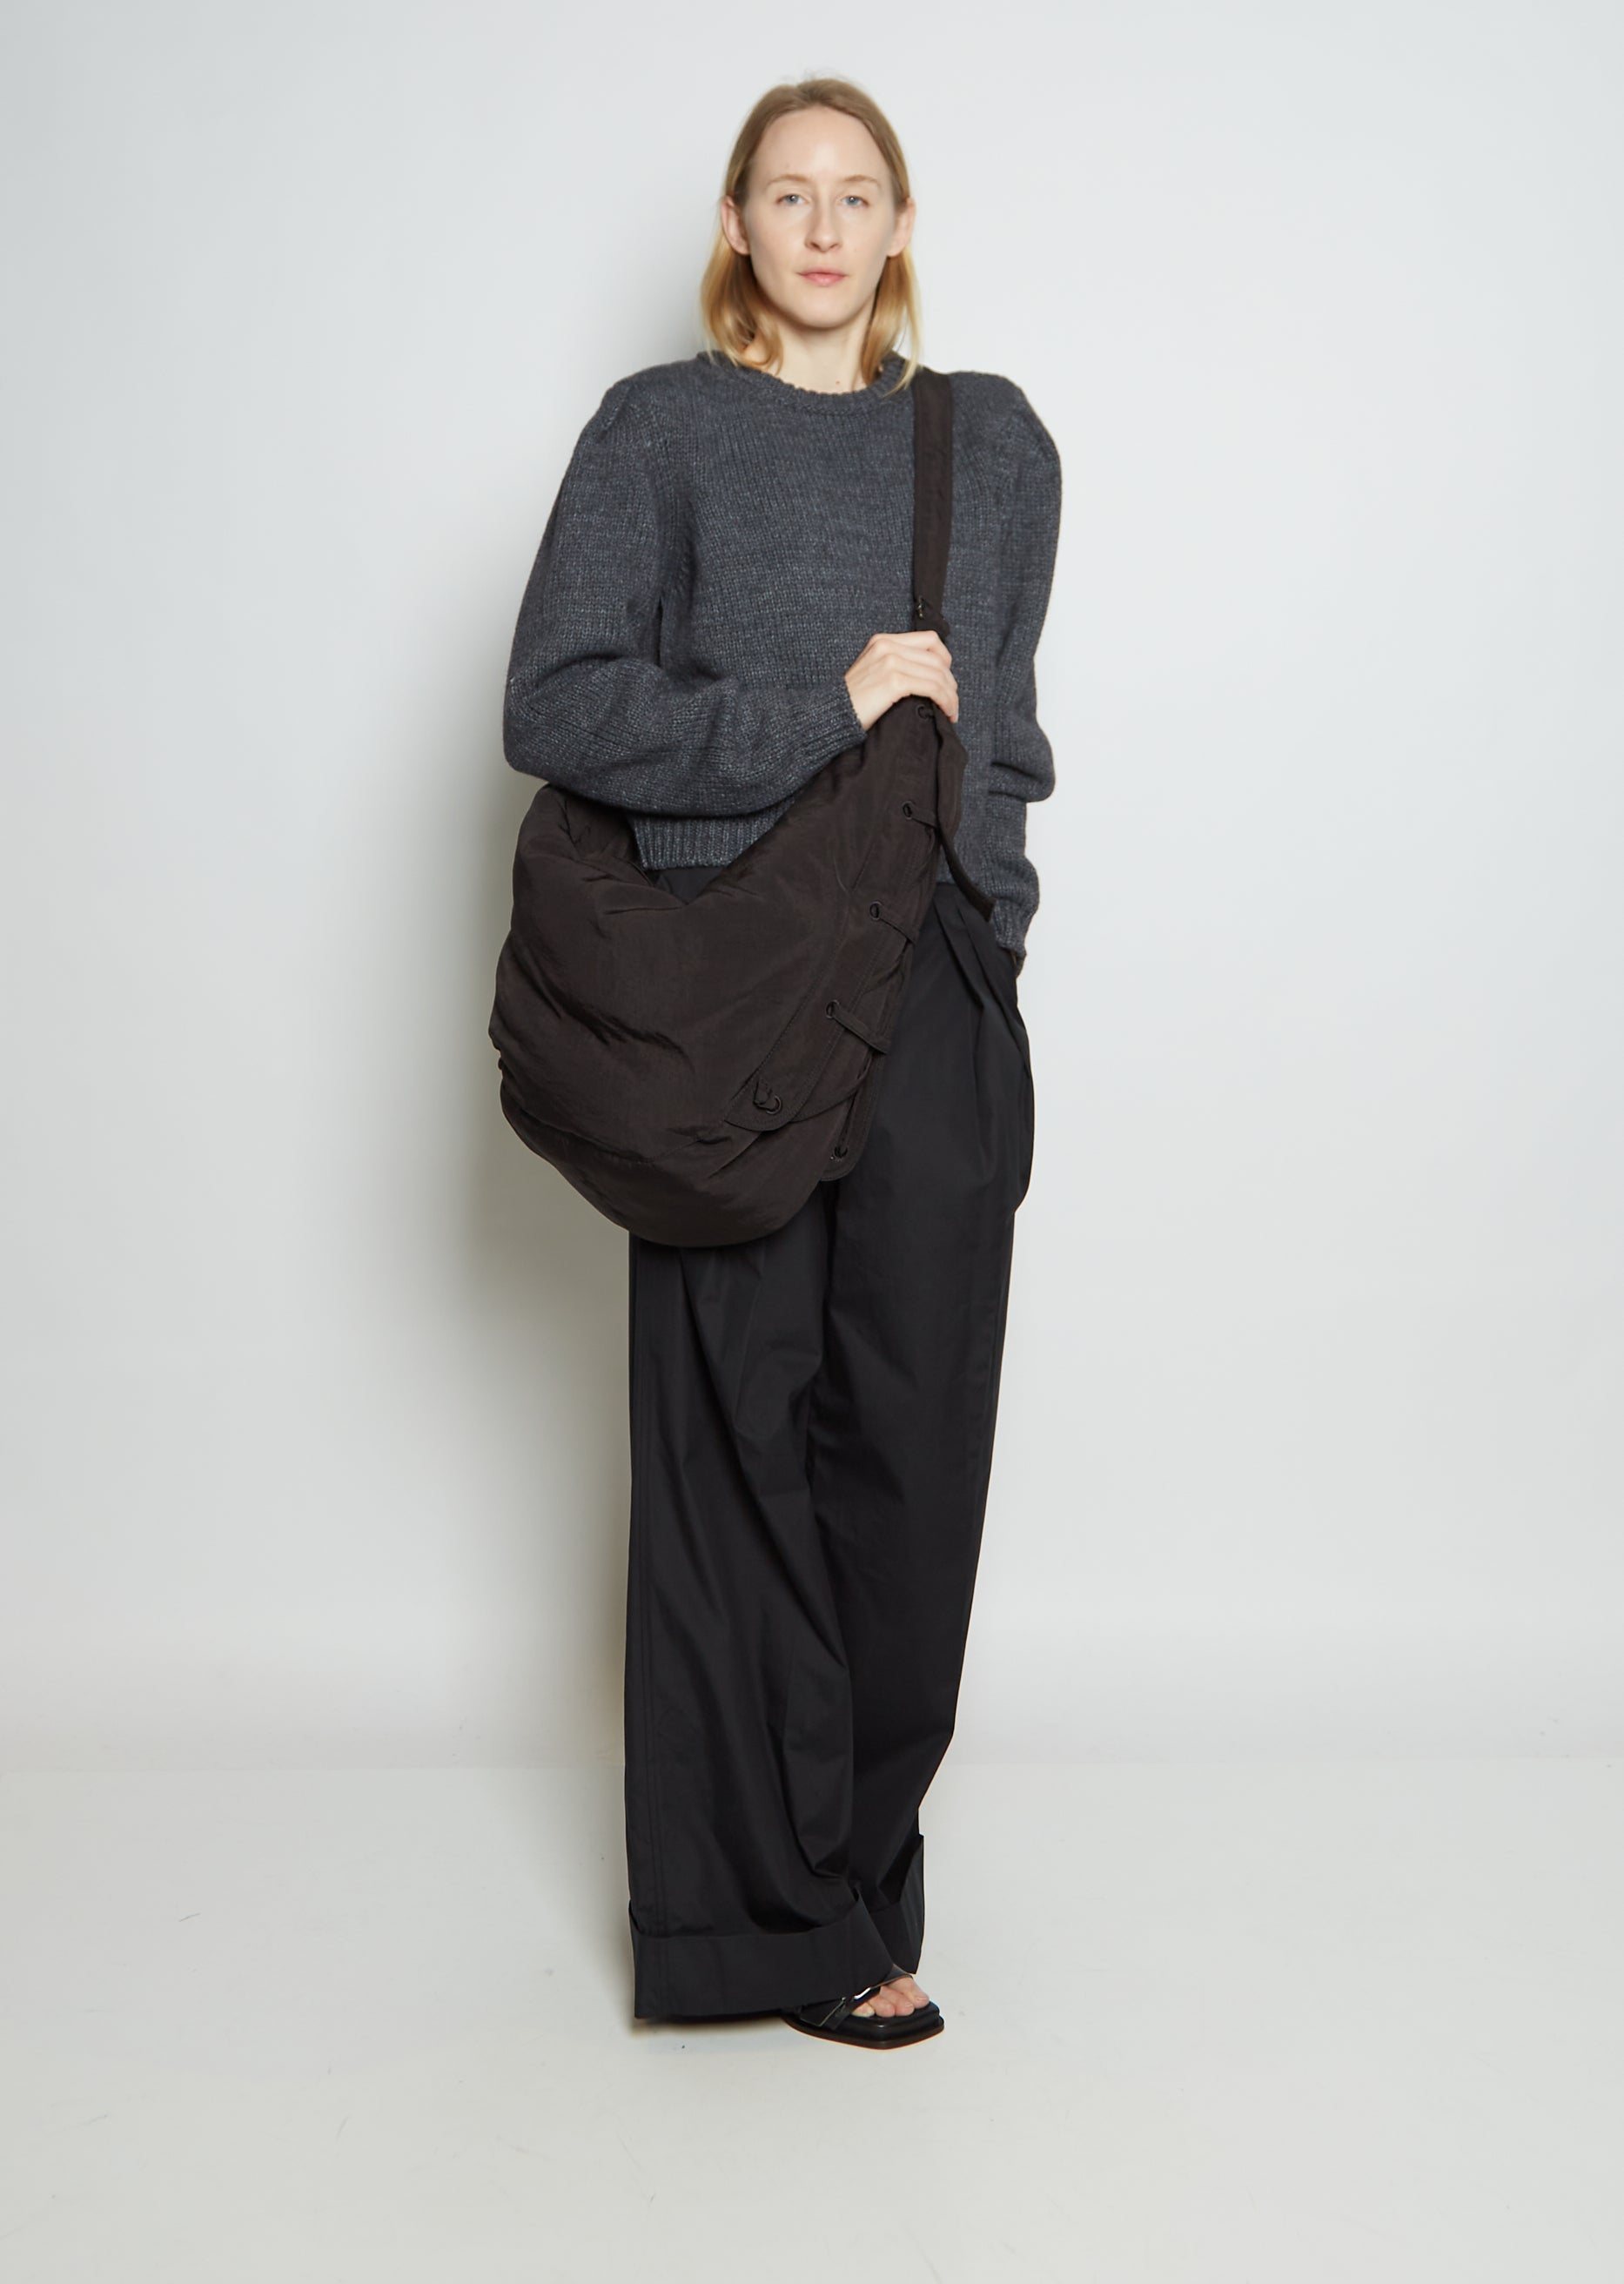 LEMAIRE small soft game bag　ブラックショルダーバッグ